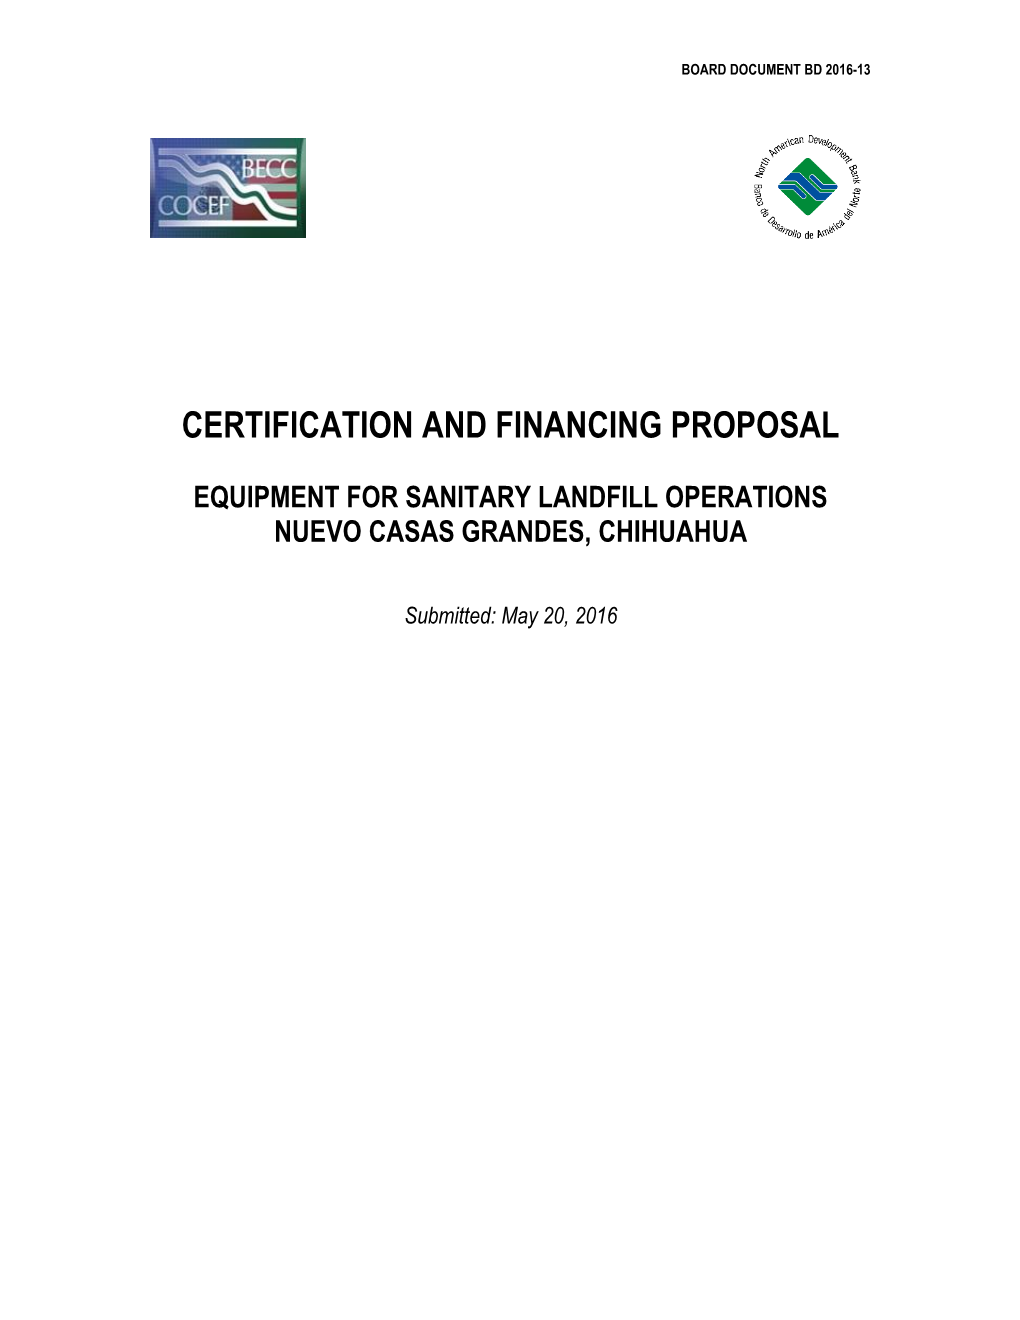 Certification and Financing Proposal Equipment for Sanitary Landfill